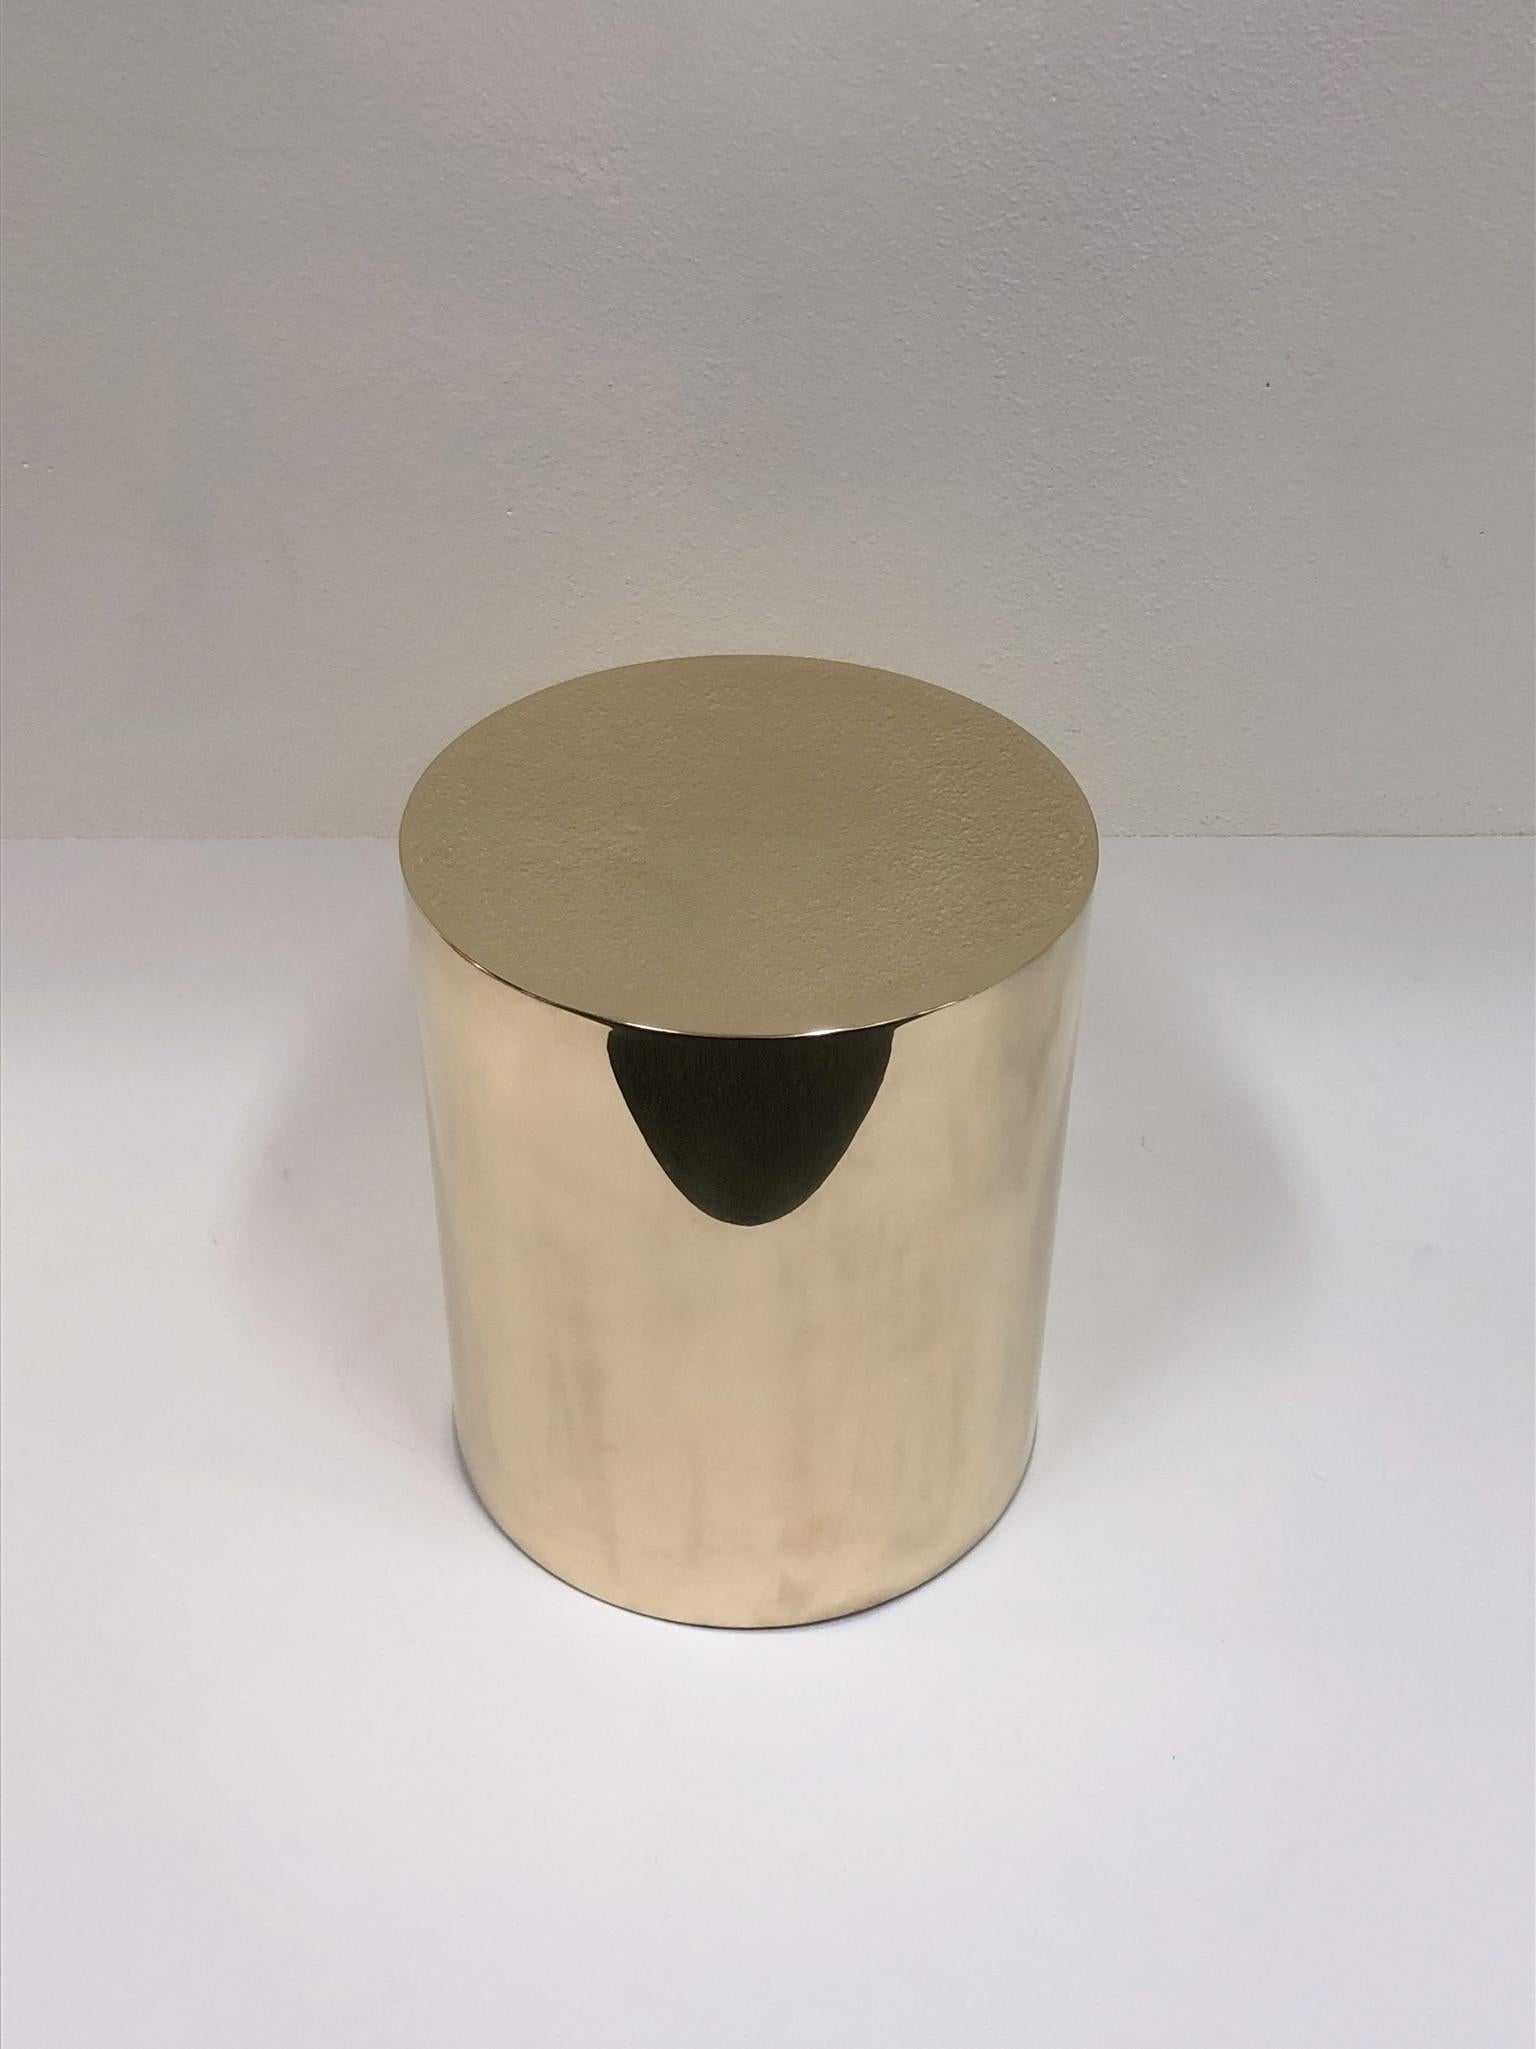 A beautiful polish brass CT drum by Brueton. This is constructed of solid brass polished into a seamless cylinder. 

Dimensions: 18” diameter 21.25” high.